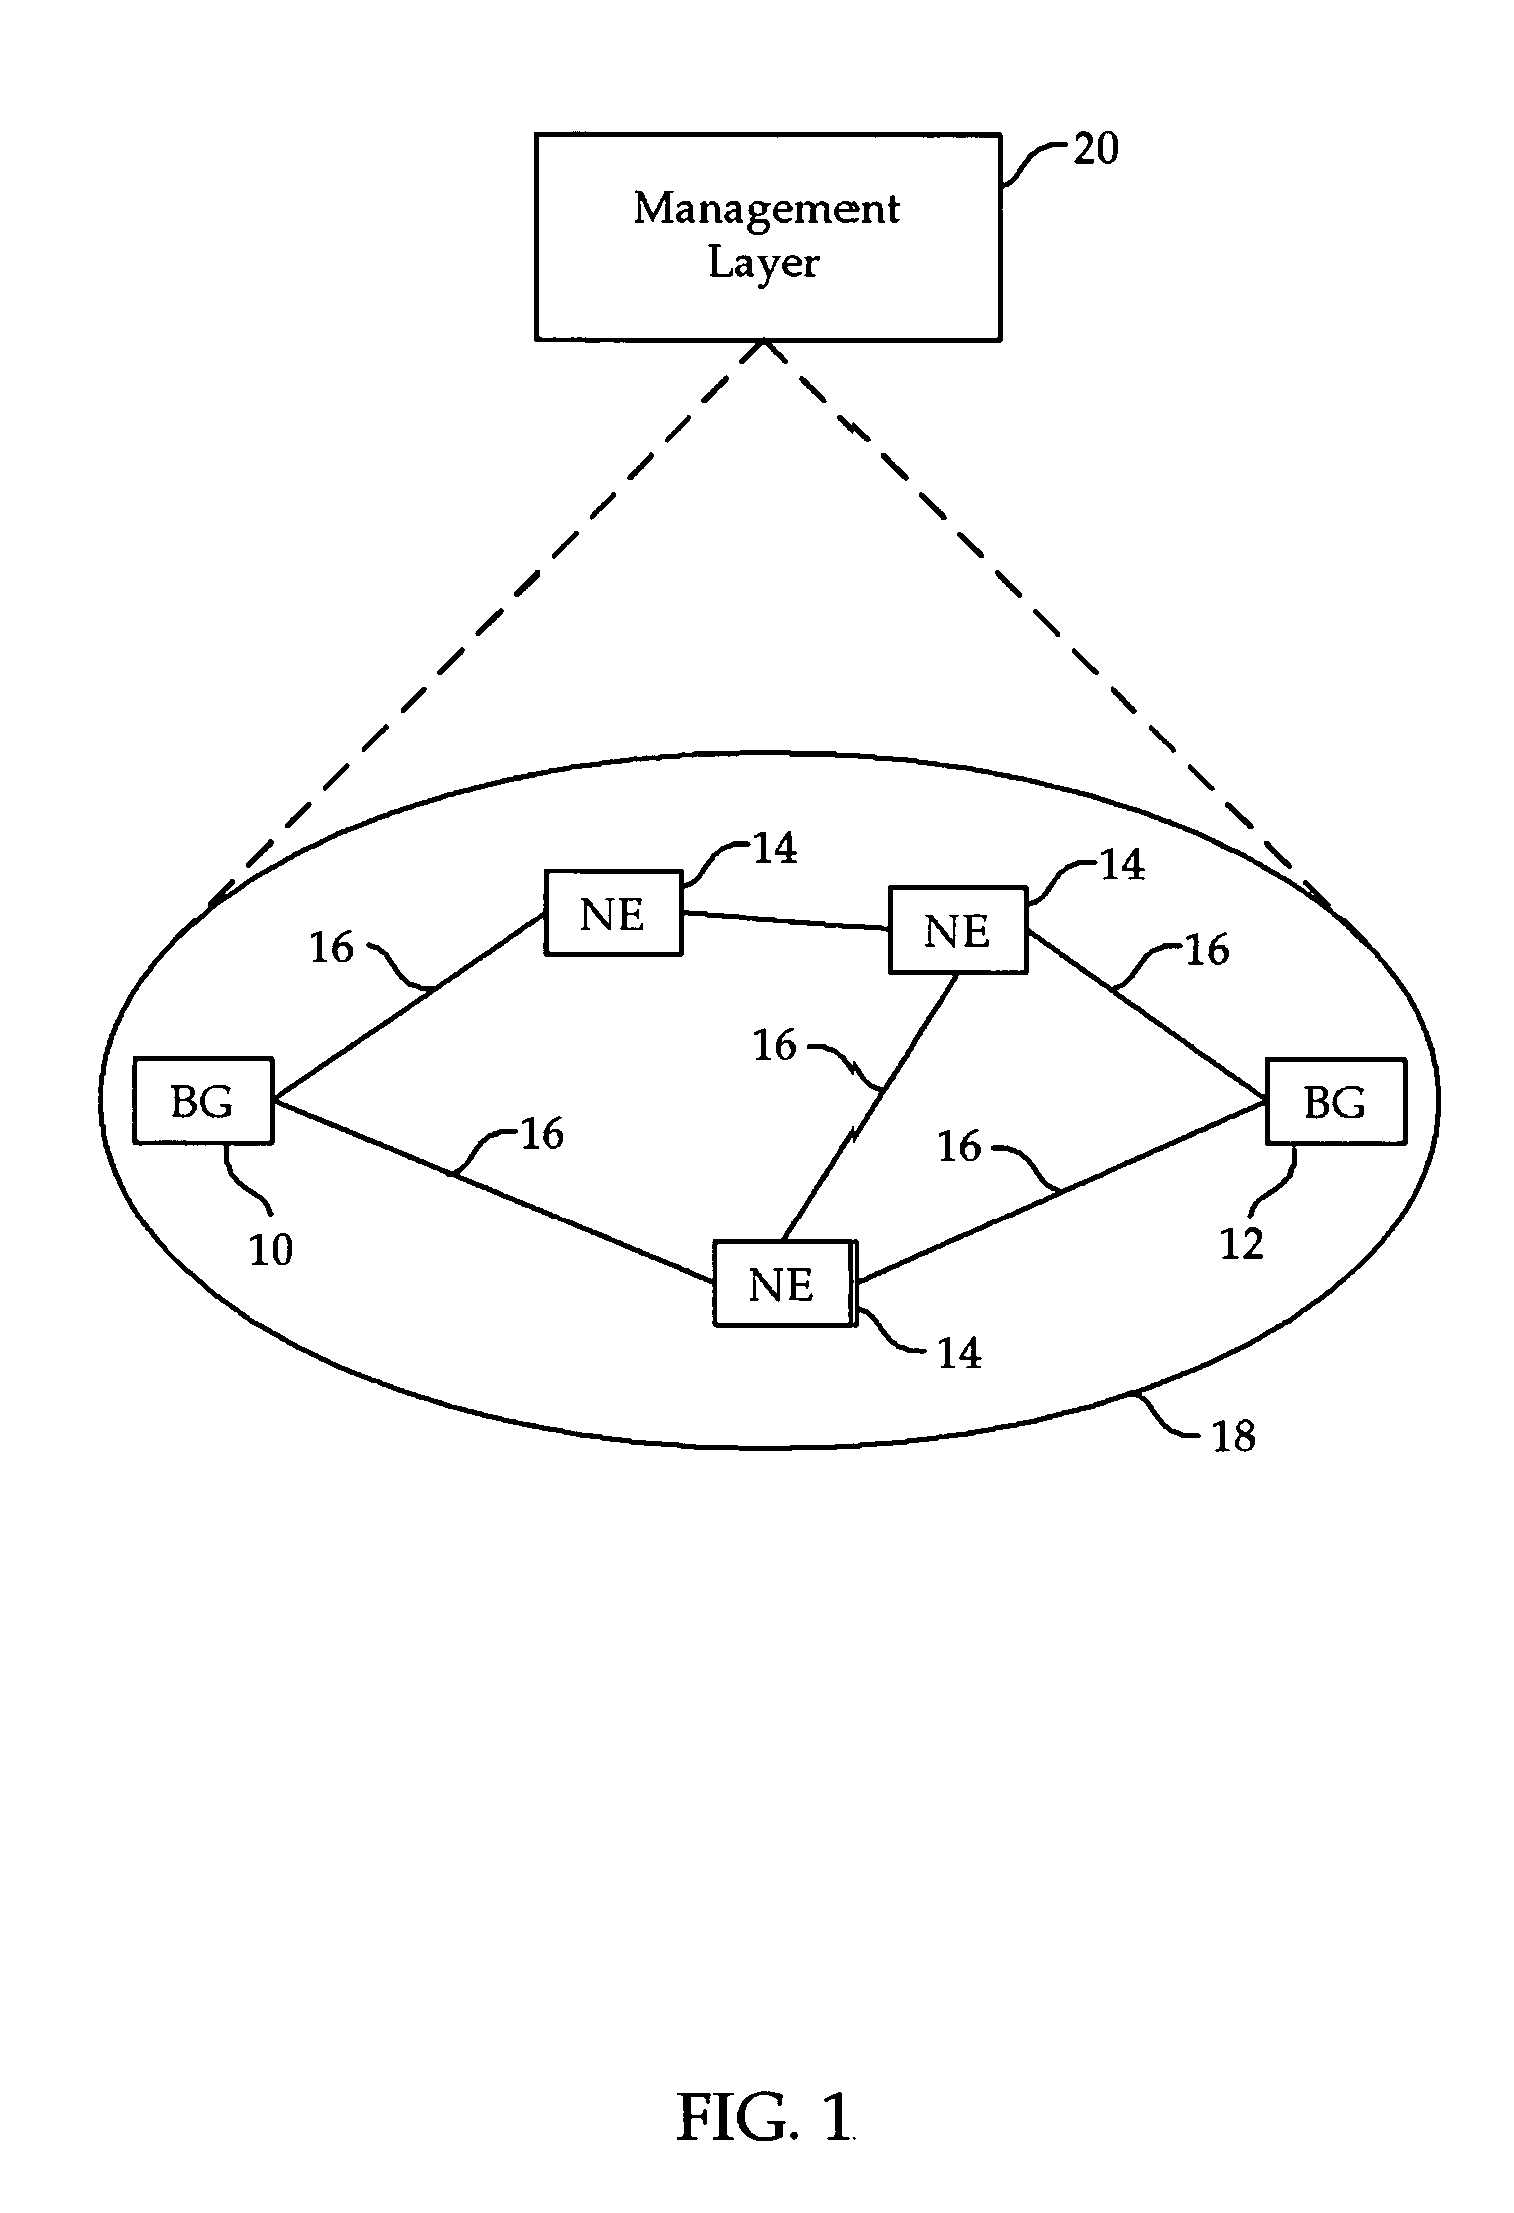 Open service discovery and routing mechanism for configuring cross-domain telecommunication services